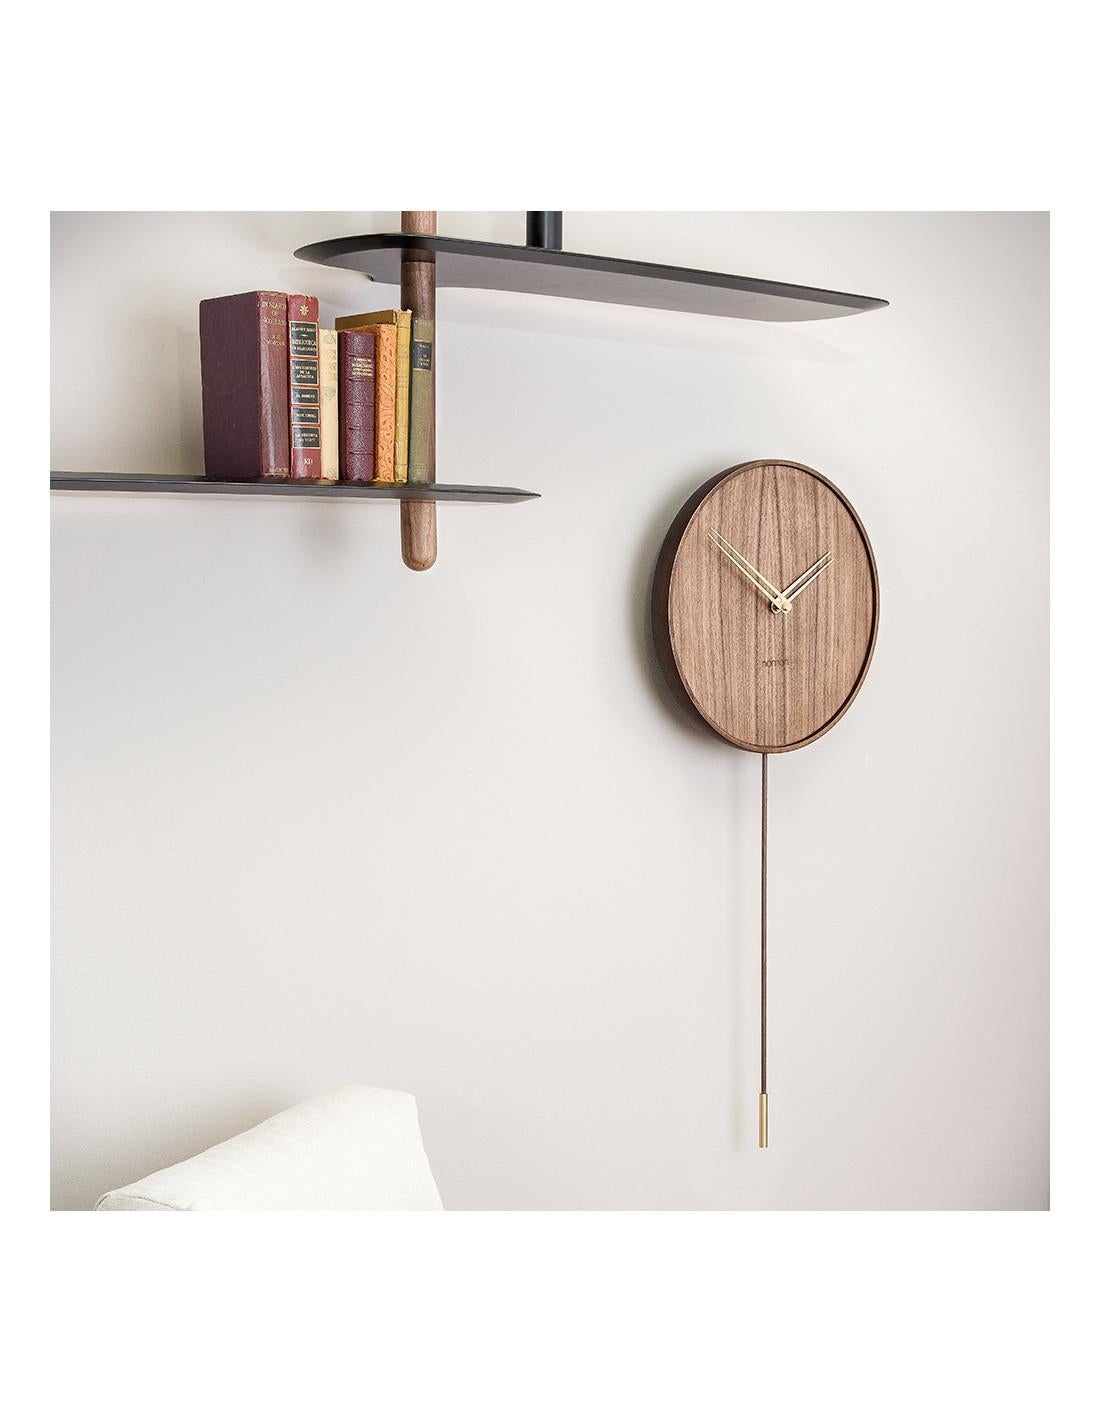 The Swing Gclock will allow you to maintain an interior design that stands out for incorporating a delicate and simplistic soft touch no matter what room you are in. The comfort of this clocks design will go hand in hand with the simple and